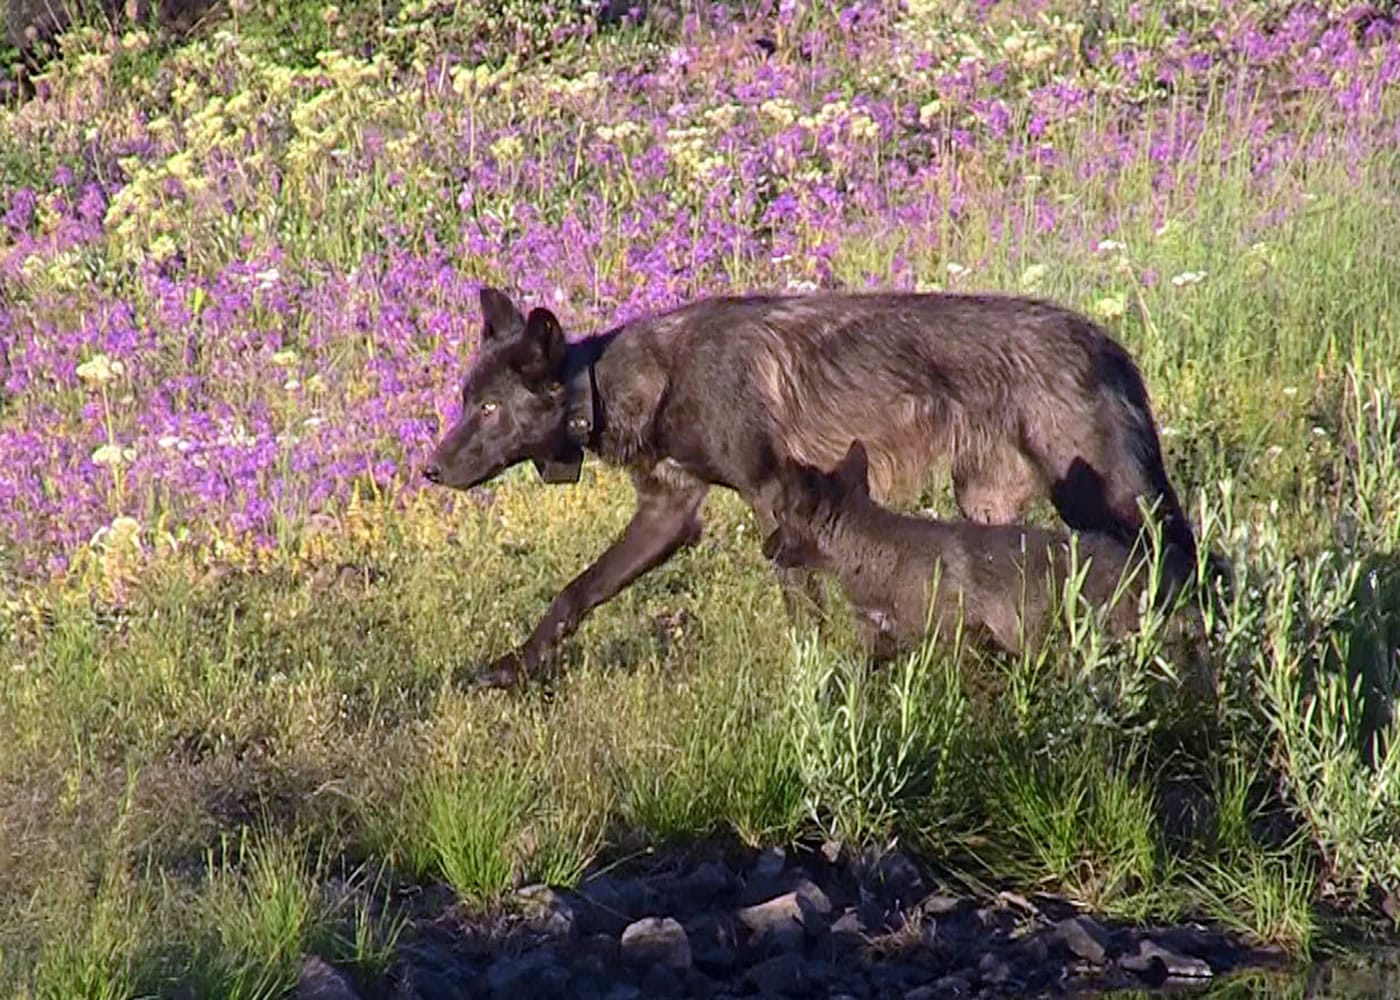 OR-17, a nonbreeding female from the Imnaha pack on the Wallowa-Whitman National Forest, walks July 6, 2013 with a pup born in 2013.